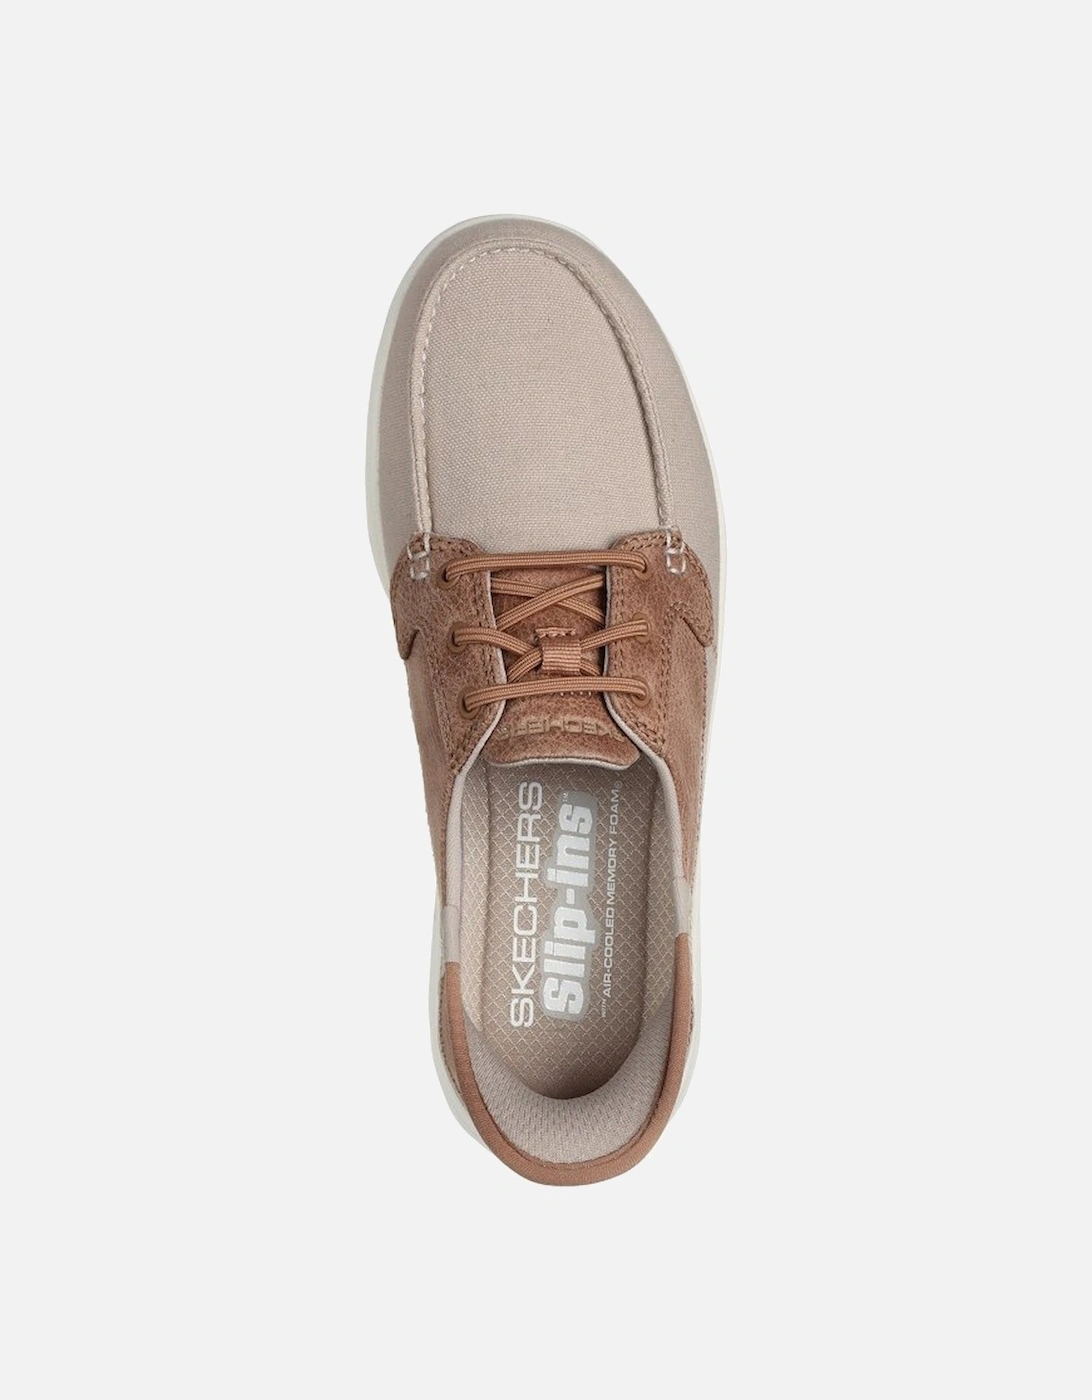 On-The-Go Flex Palmilla Boat Womens Trainers